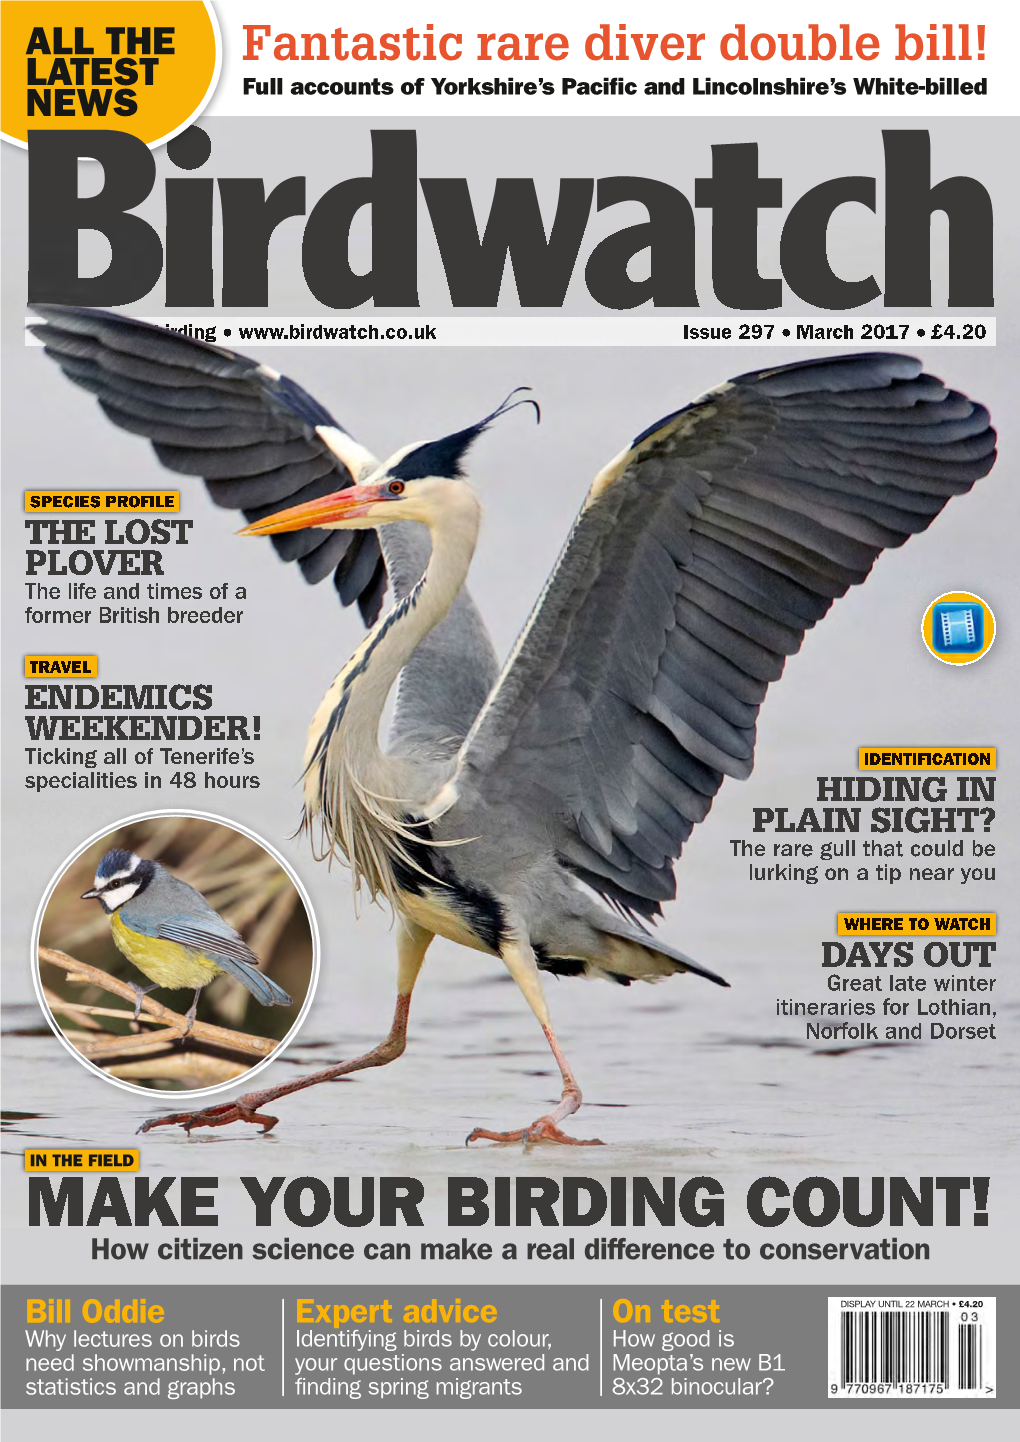 MAKE YOUR BIRDING COUNT! How Citizen Science Can Make a Real Difference to Conservation